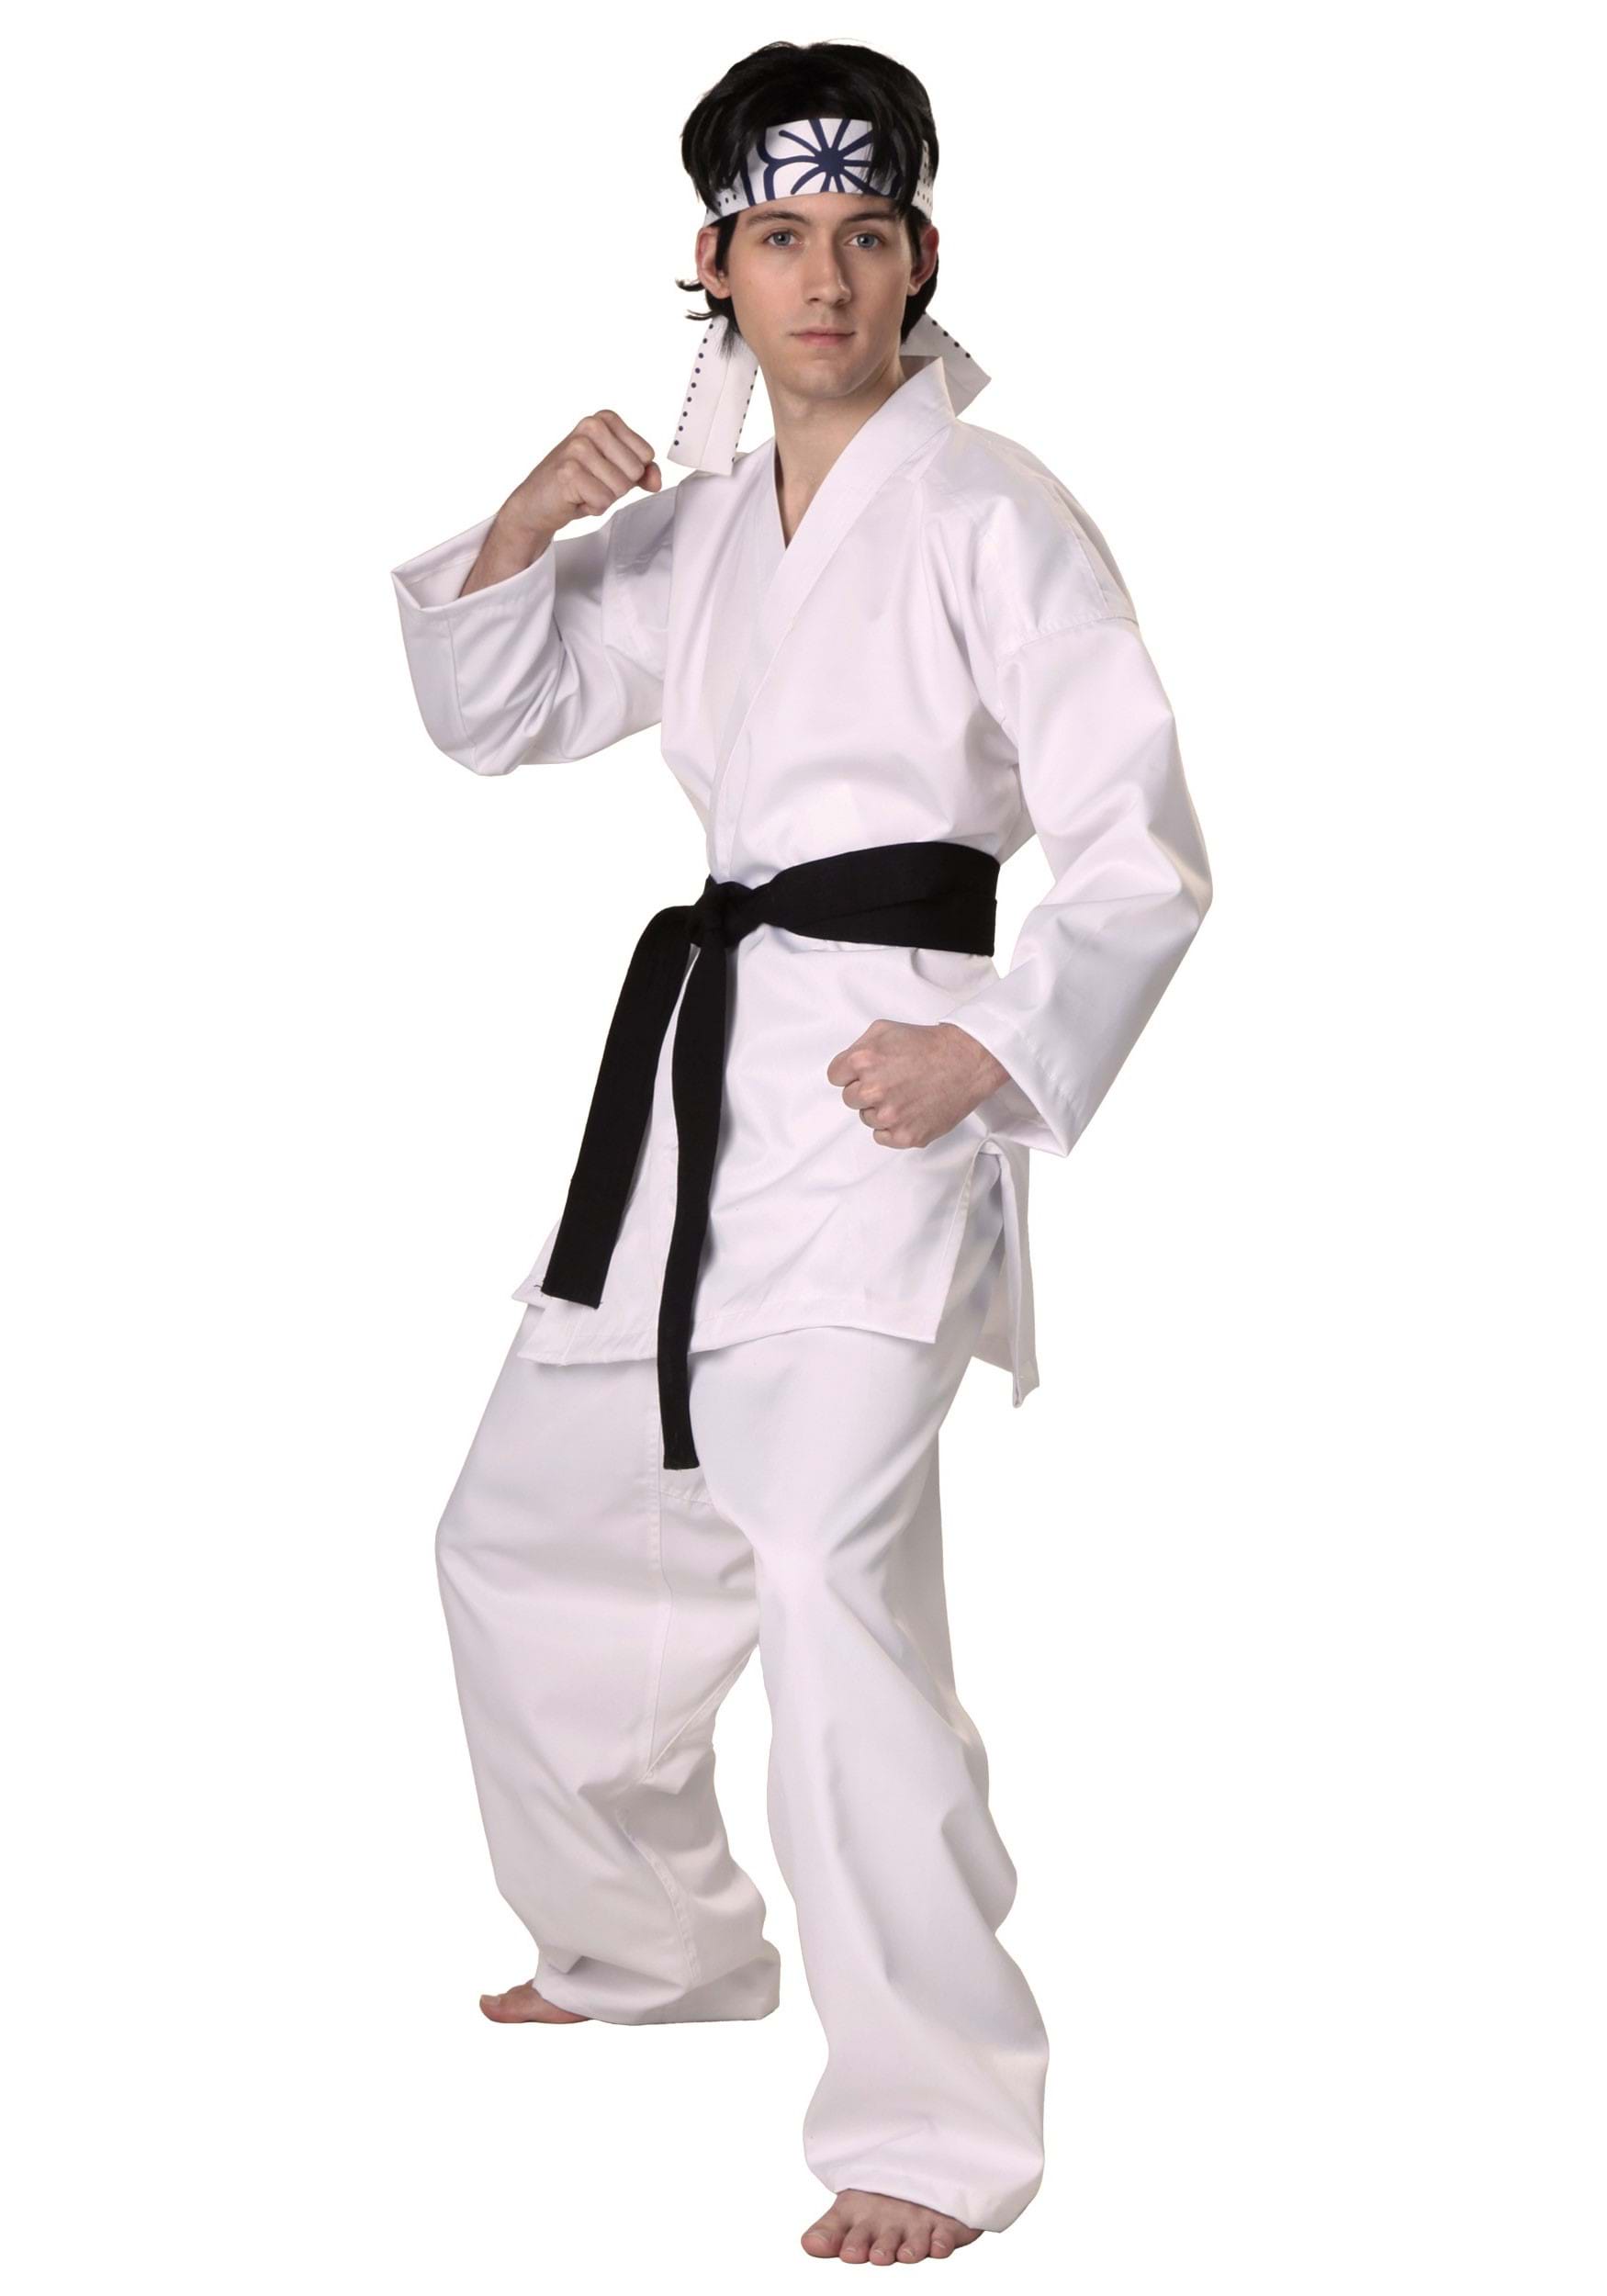 Authentic Karate Daniel San Costume For Adults